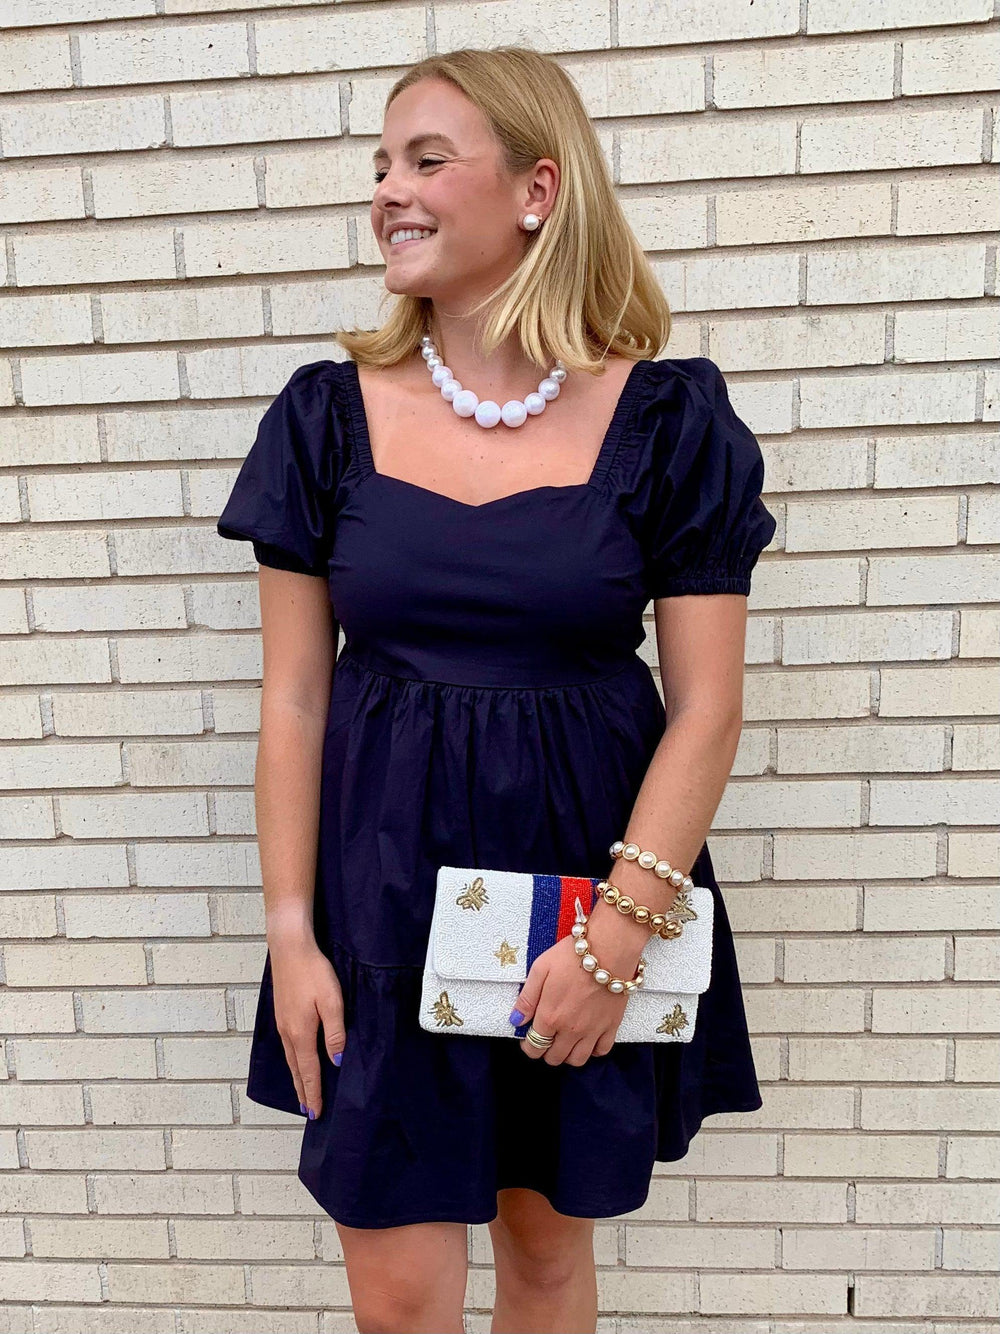 This is how you can style the pearls from Tres Chic